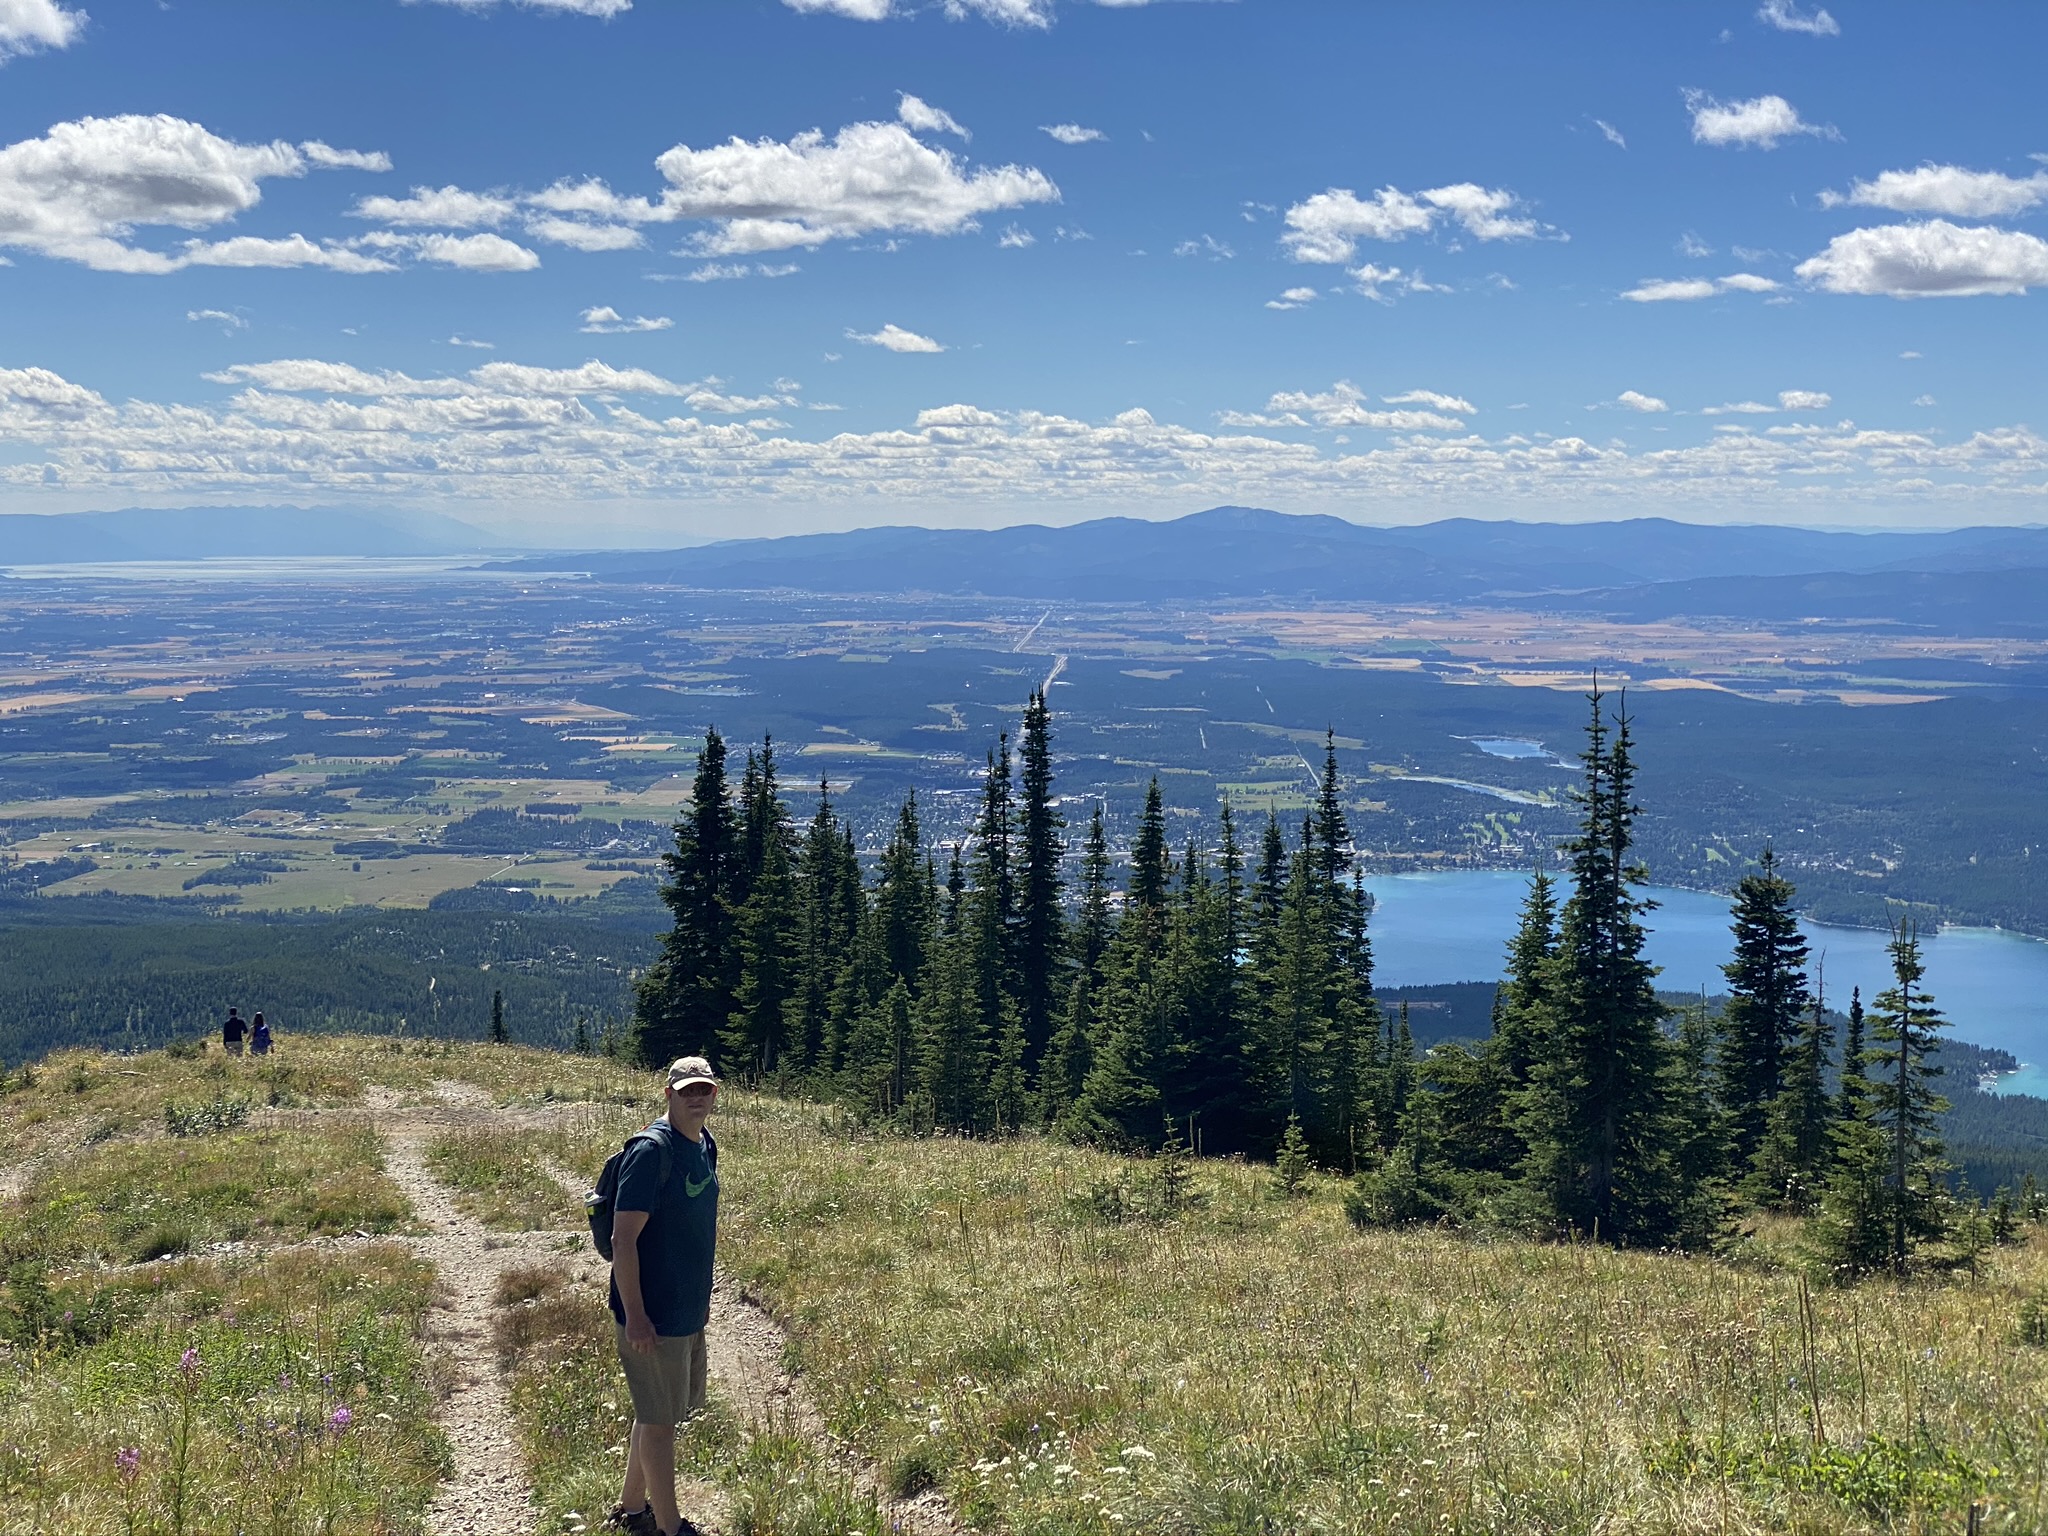 Image of Tim hiking in Montana's Flathead Valley.